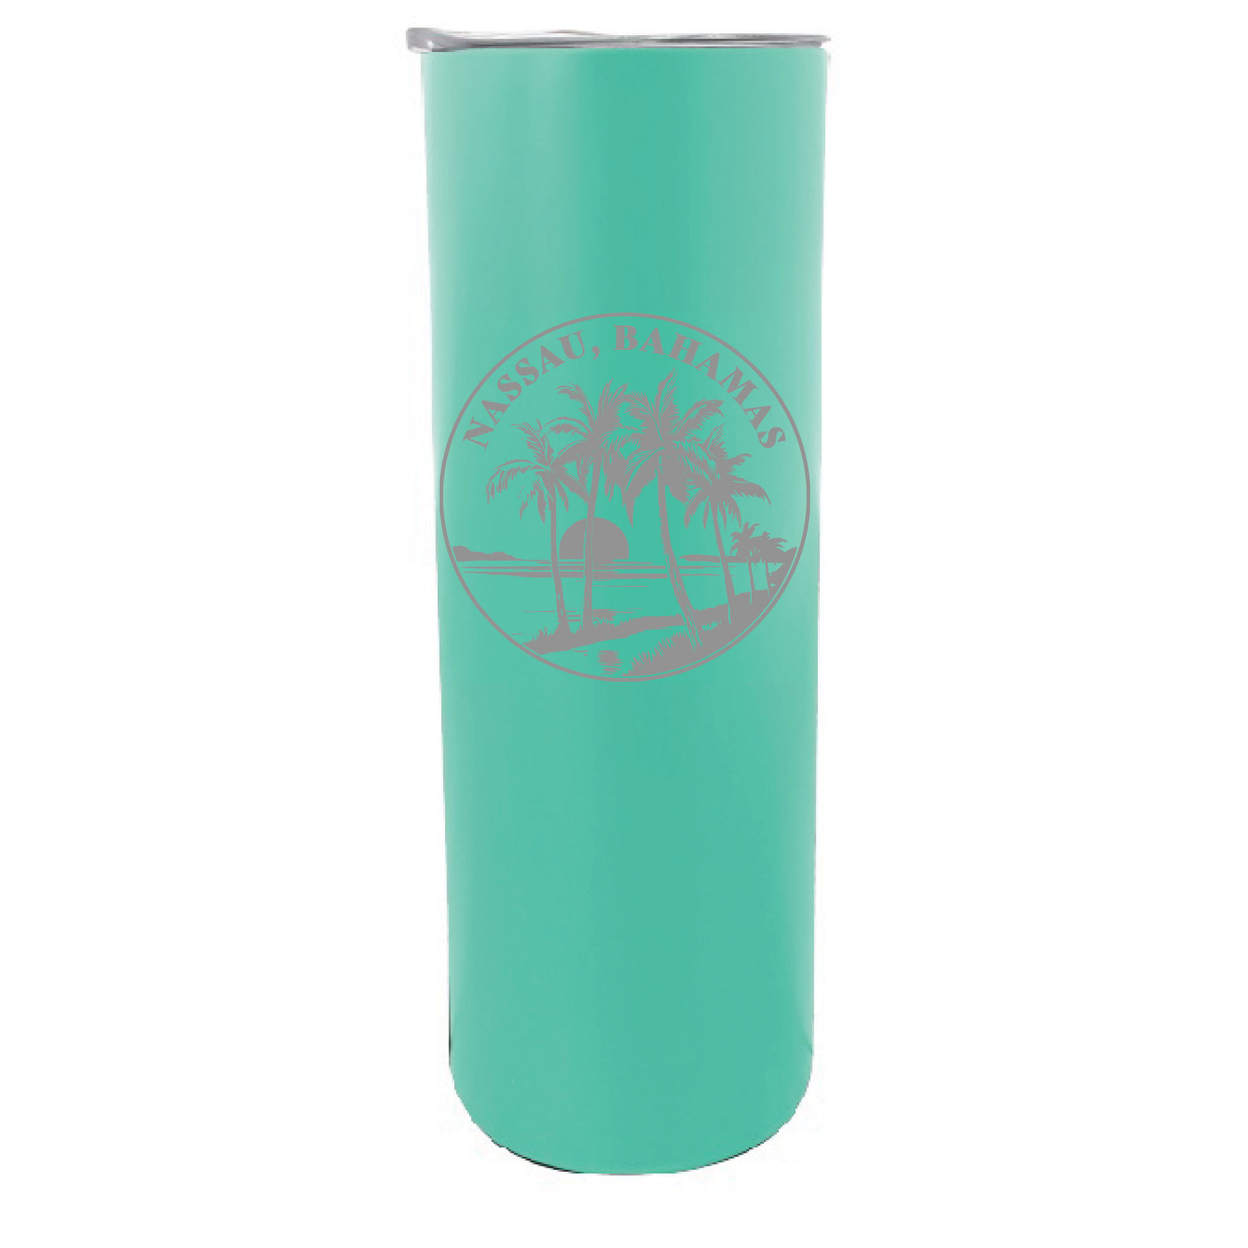 Nassau The Bahamas Souvenir 20 Oz Engraved Insulated Stainless Steel Skinny Tumbler - Seafoam,,4-Pack